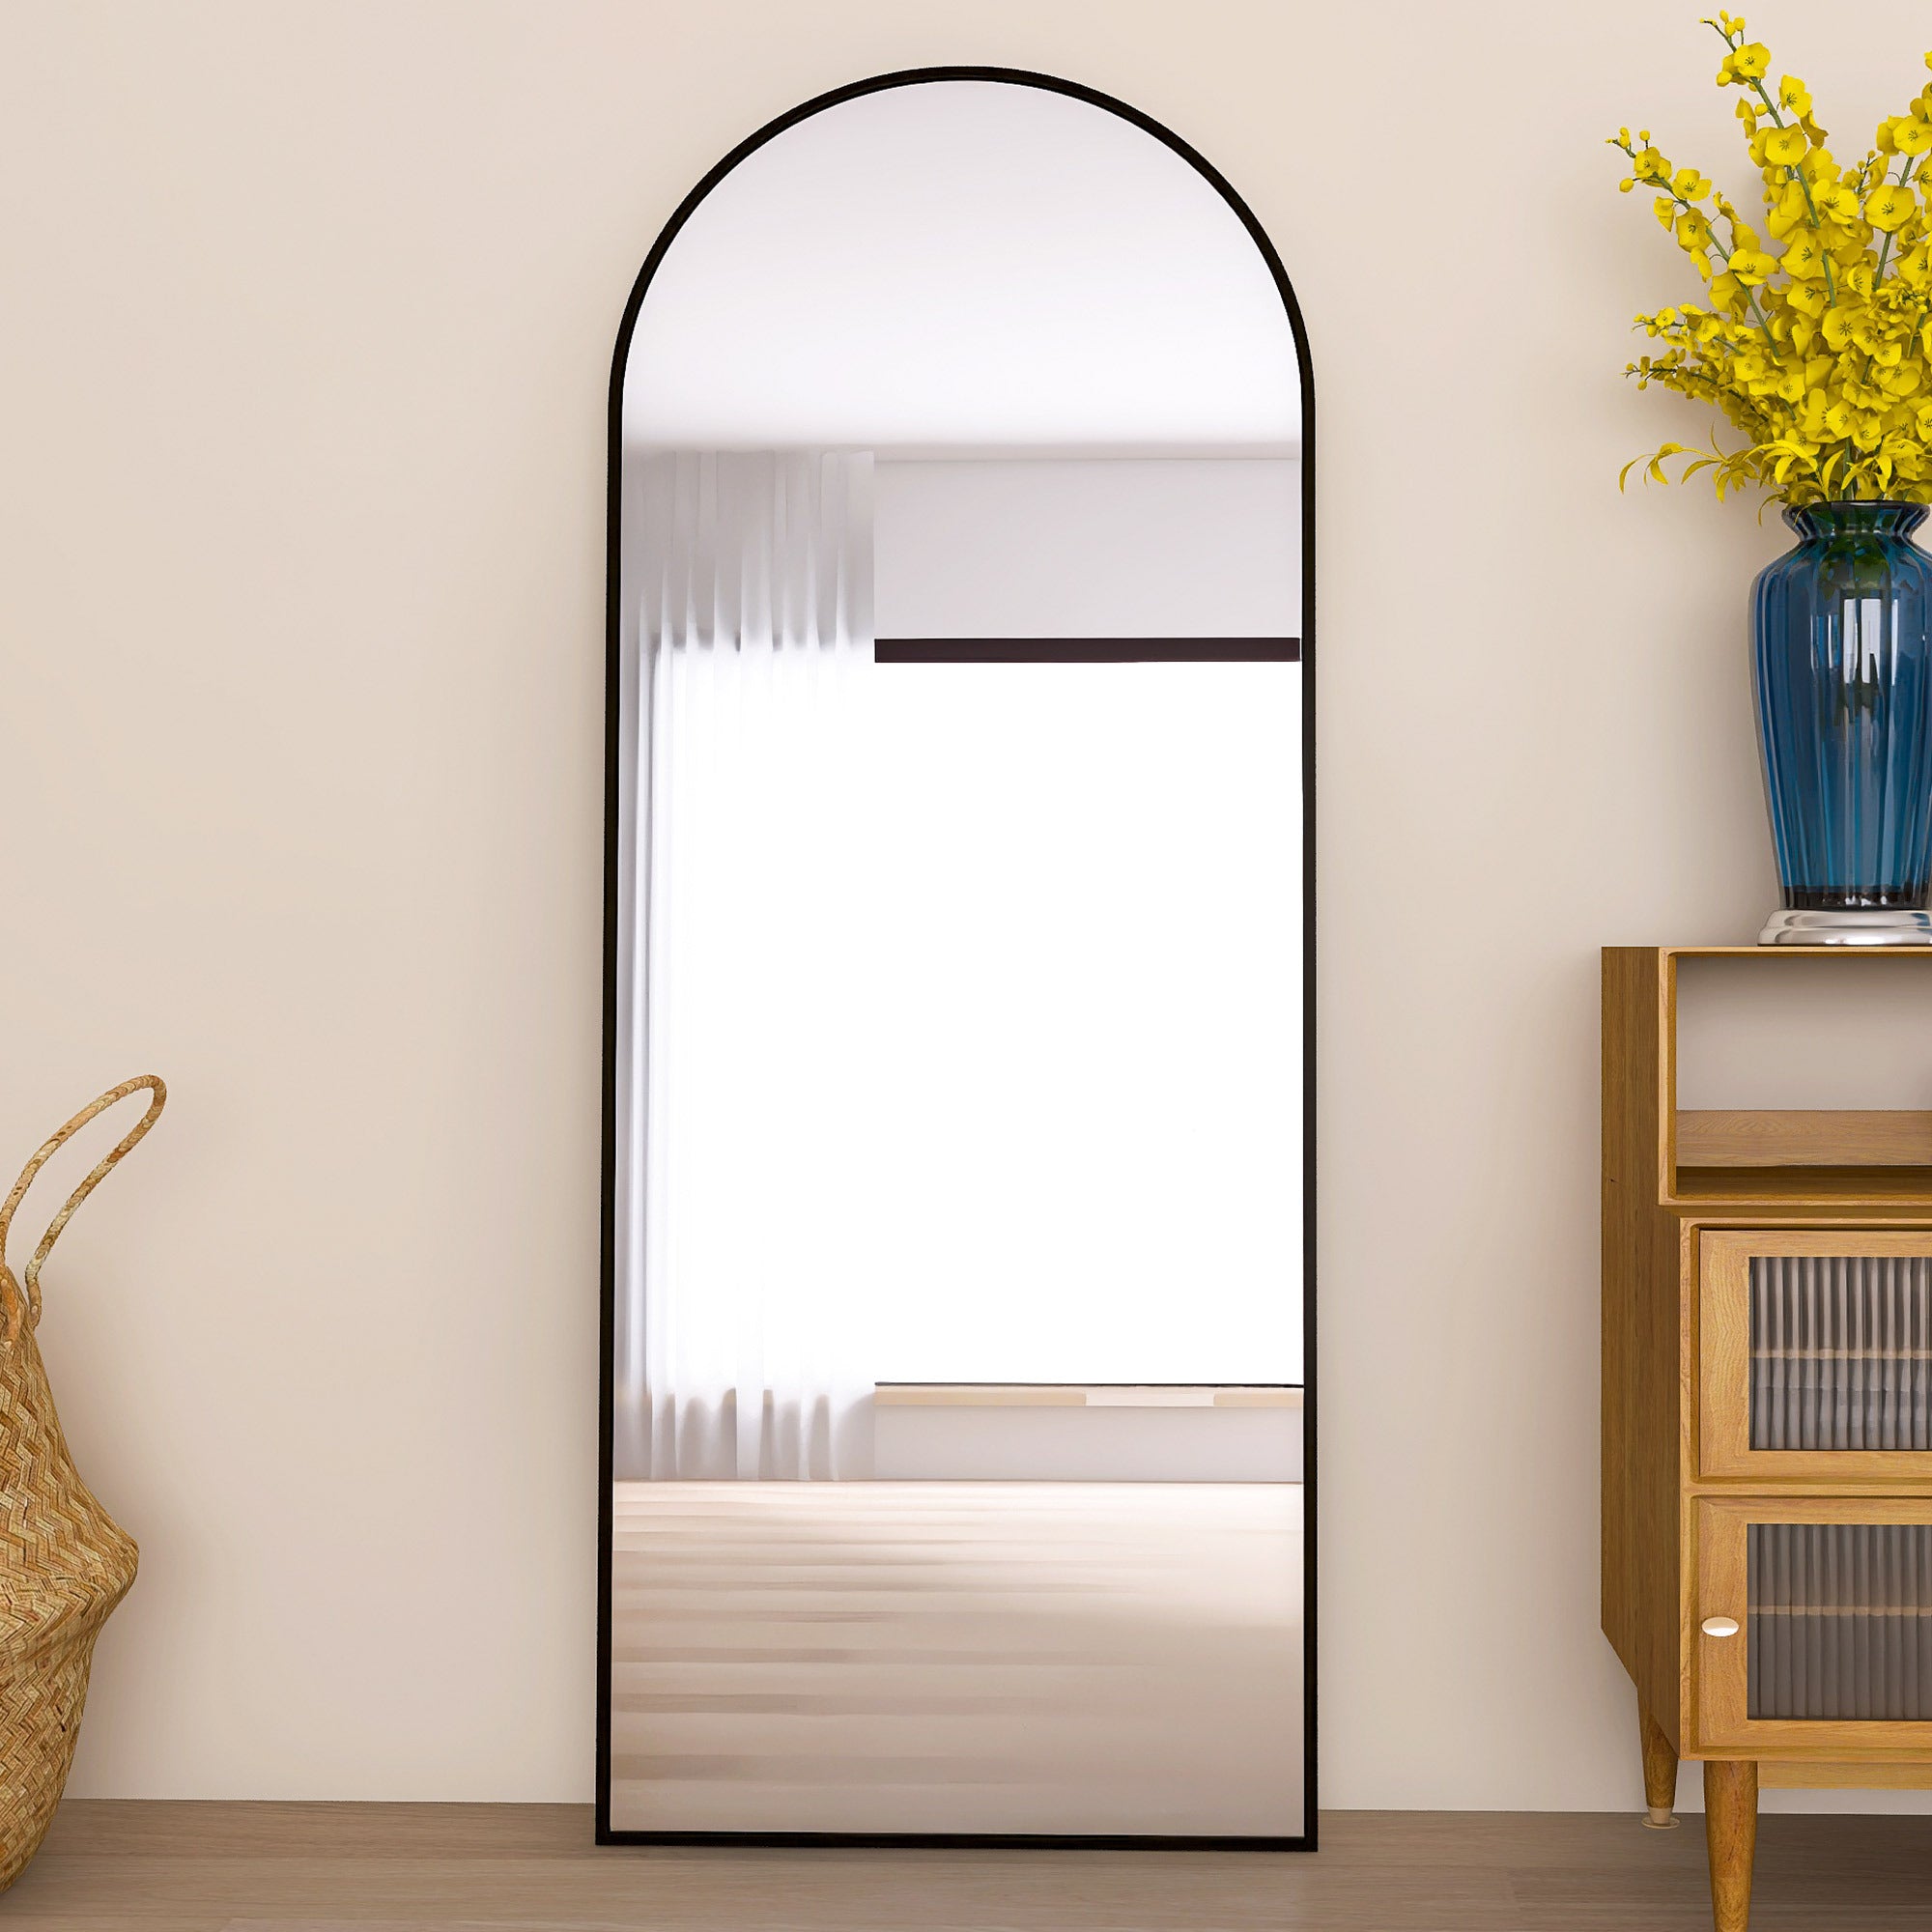 Arched Full Length Mirror Floor Mirror Hanging Standing or Leaning (Black)